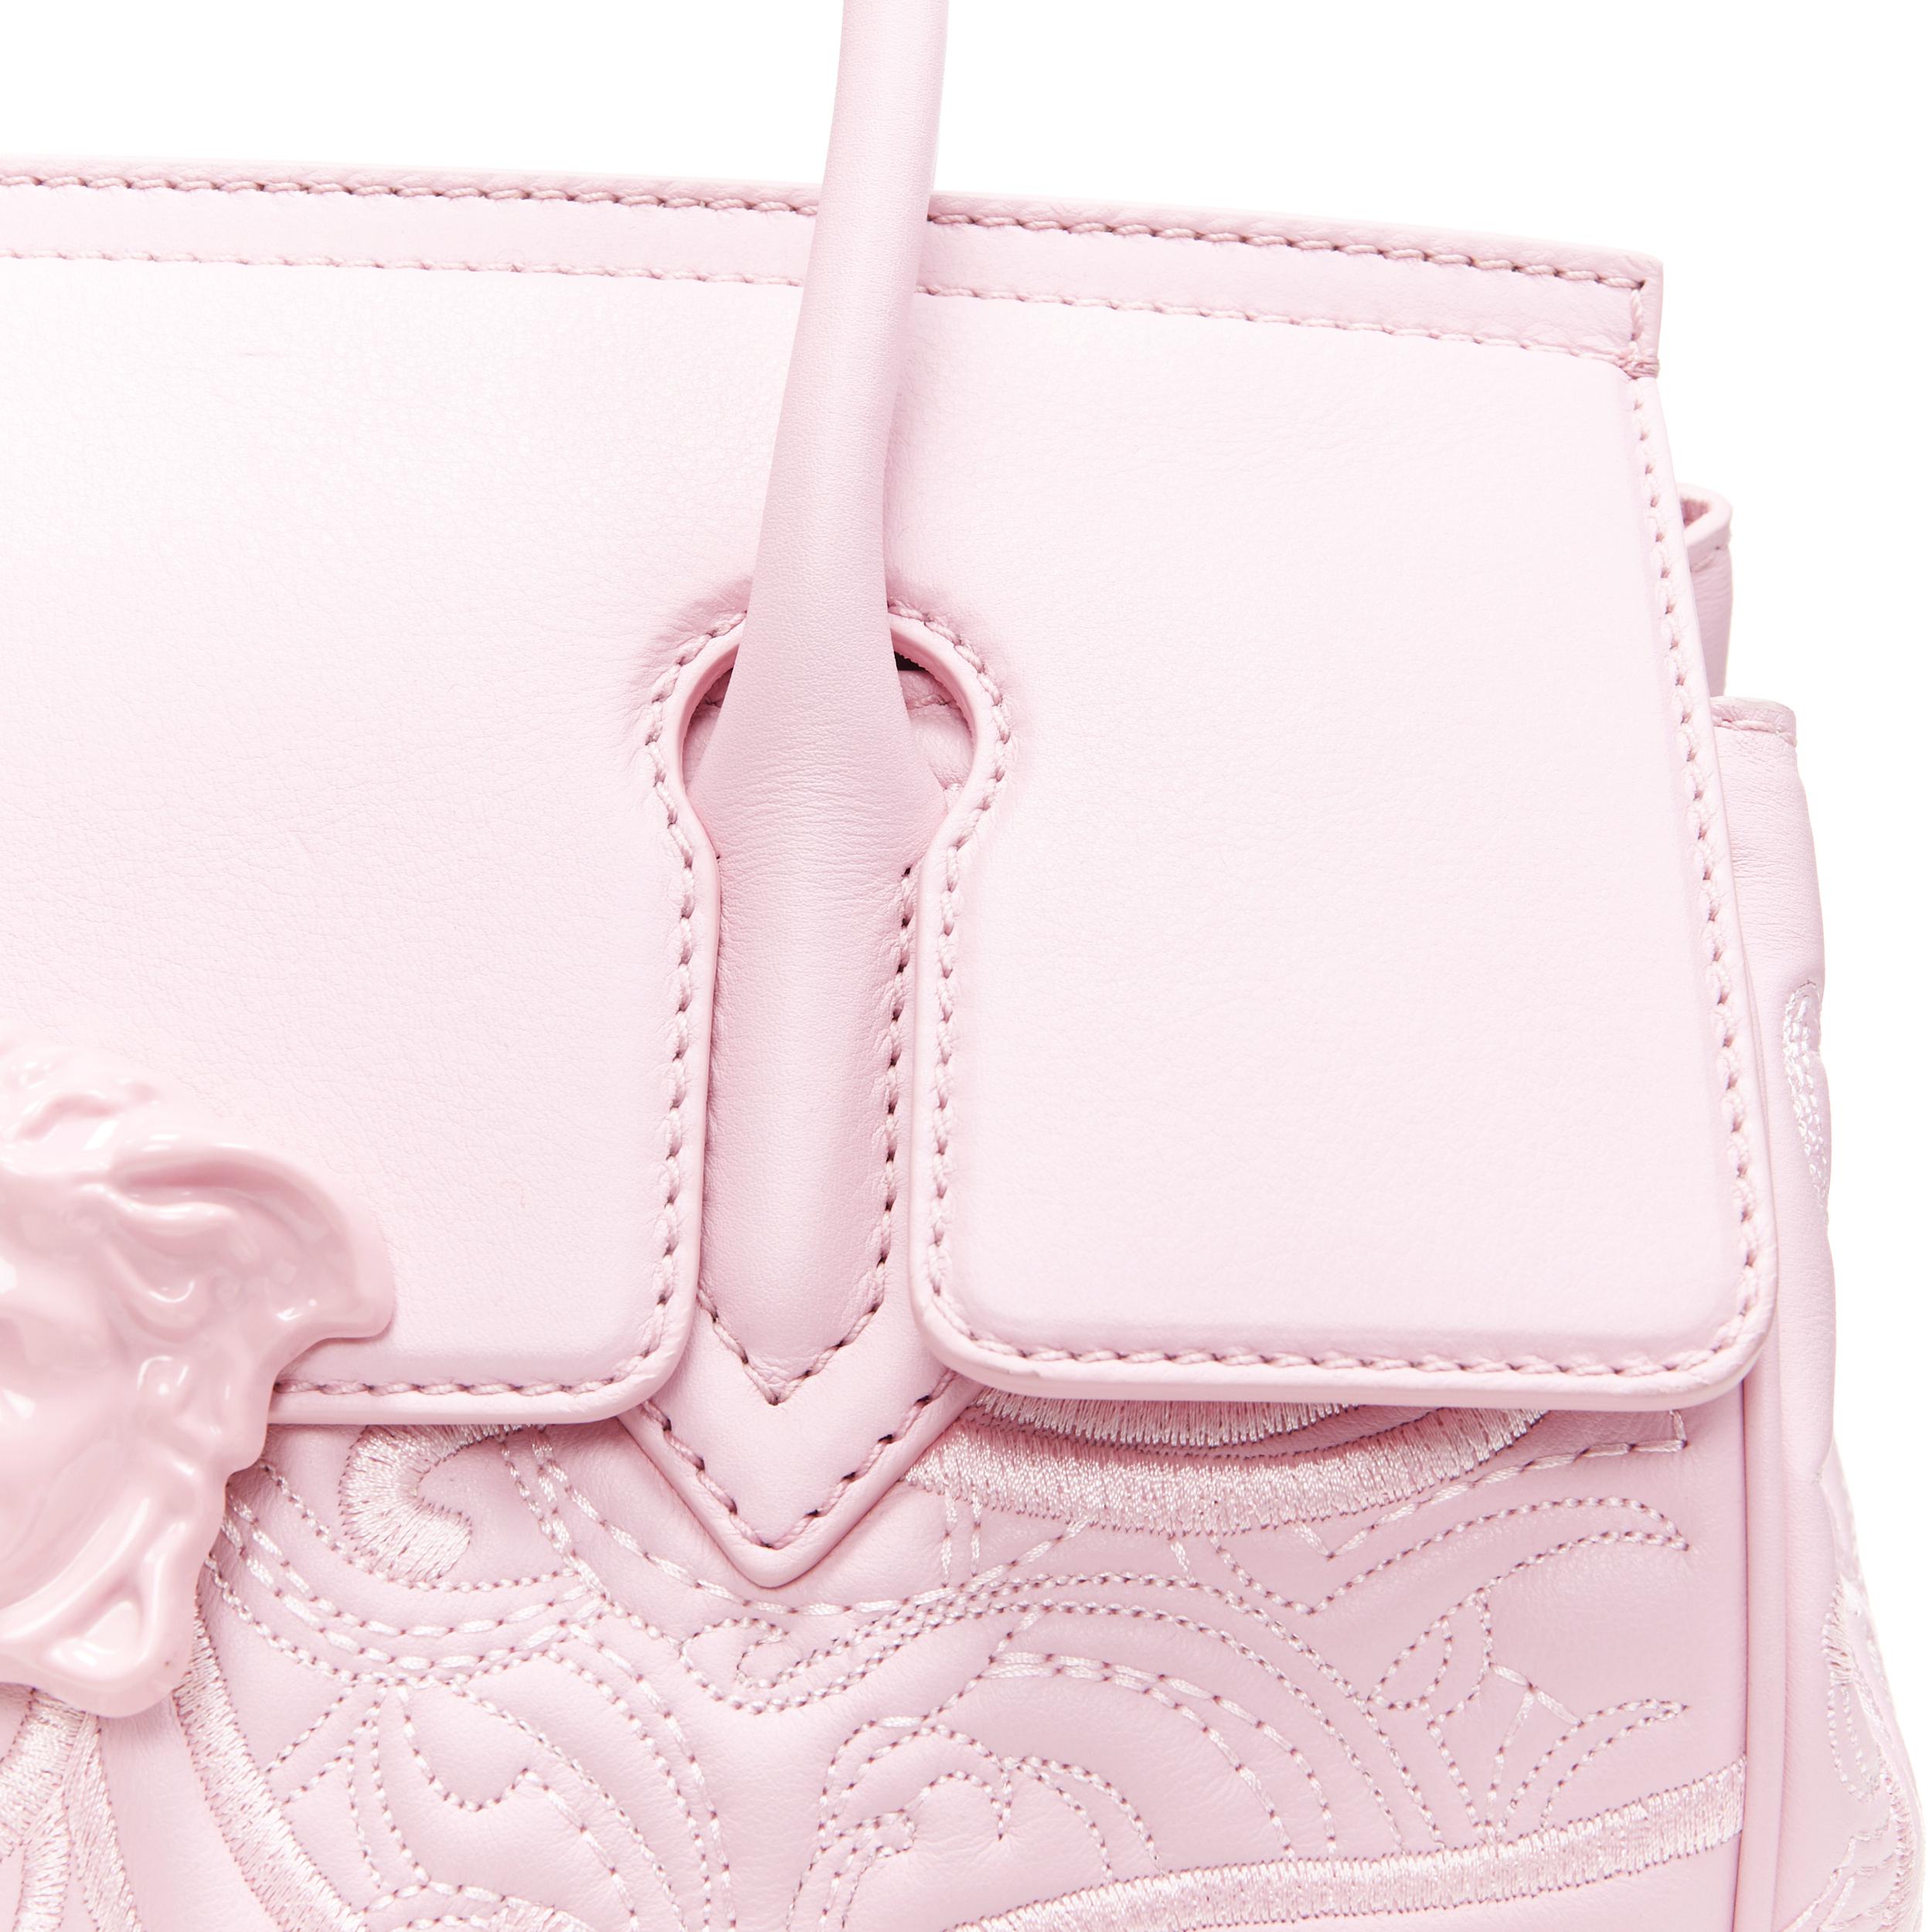 Women's new VERSACE Palazzo Empire pink leather embroidery Medusa flap shoulder bag